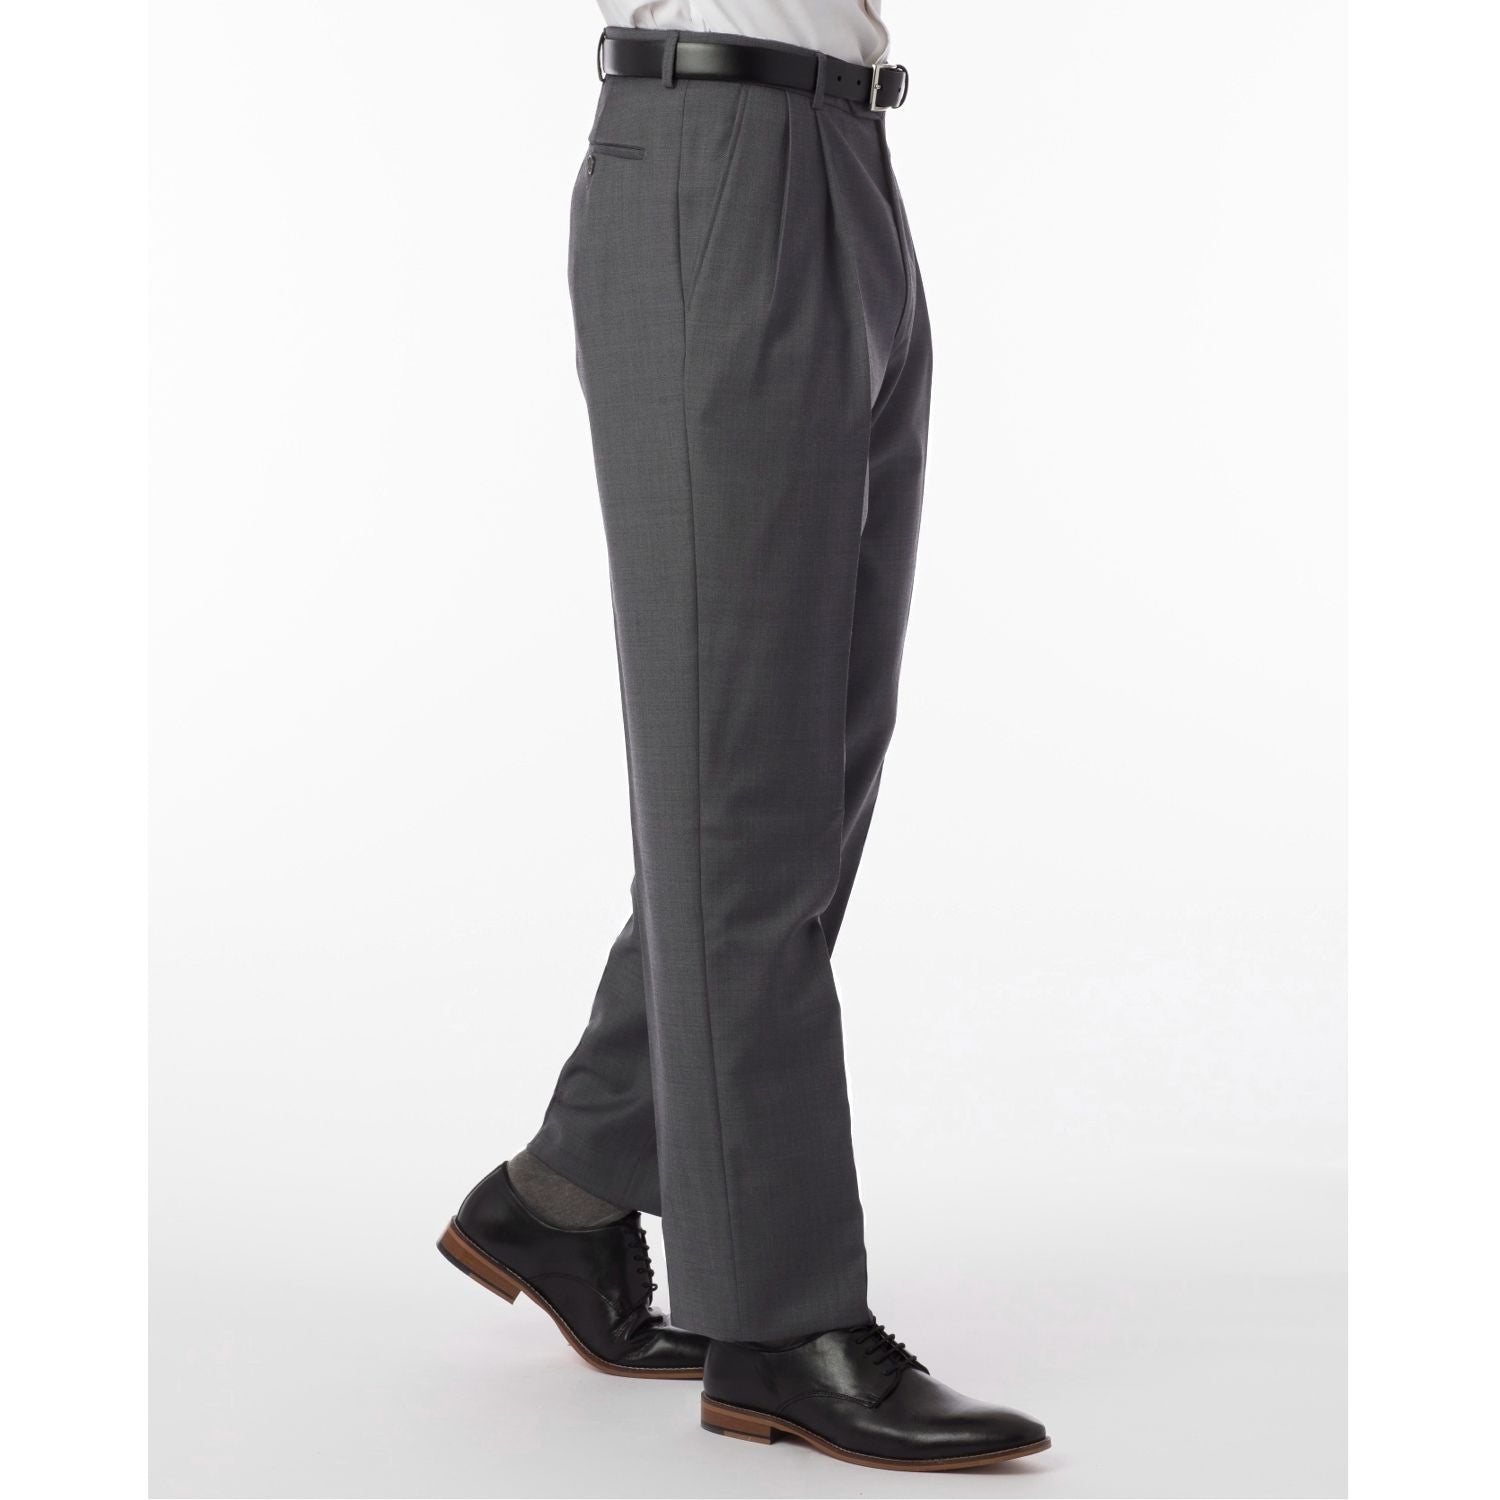 Super 120s Wool Travel Twill Comfort-EZE Trouser in Medium Grey (Manchester Pleated Model) by Ballin